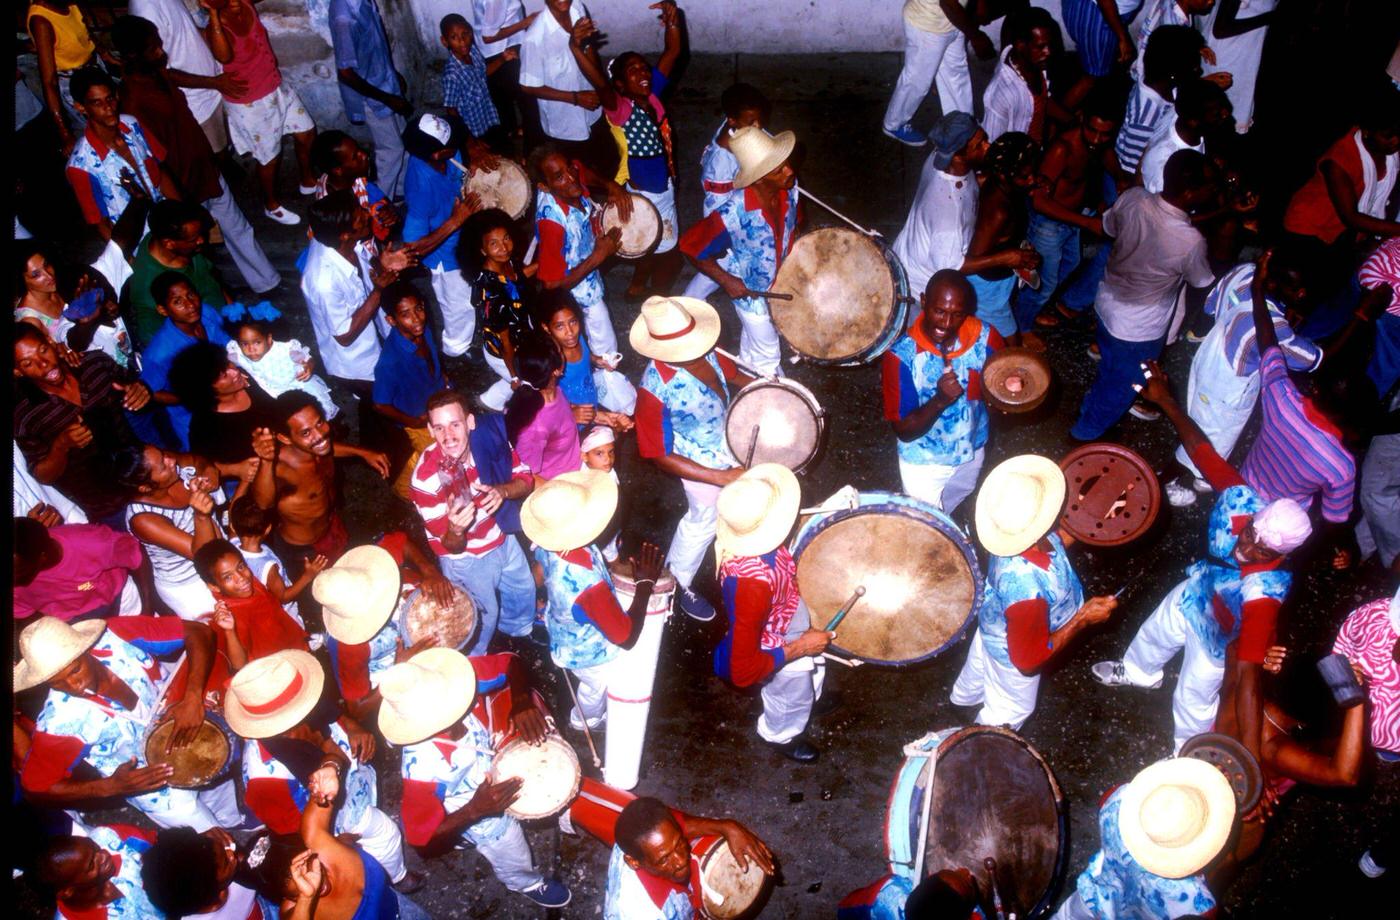 Cuban musicians playing congas during the Carnival party in Santiago de Cuba, 1990s.